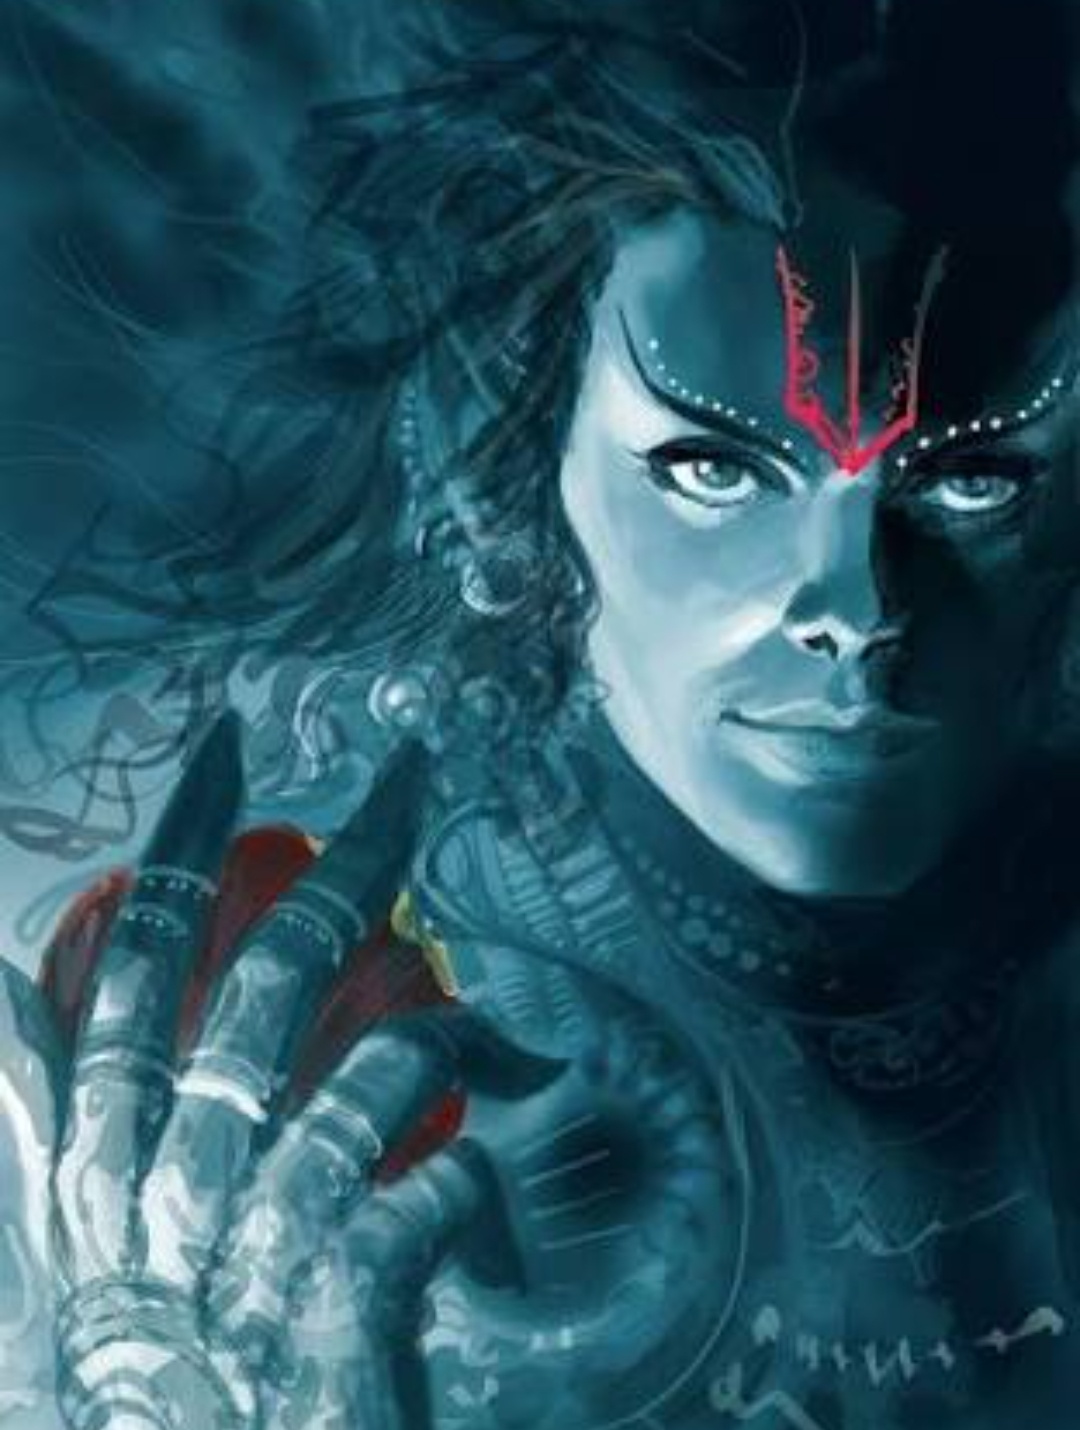 What are some epic and unseen wallpaper of Lord Shiva?